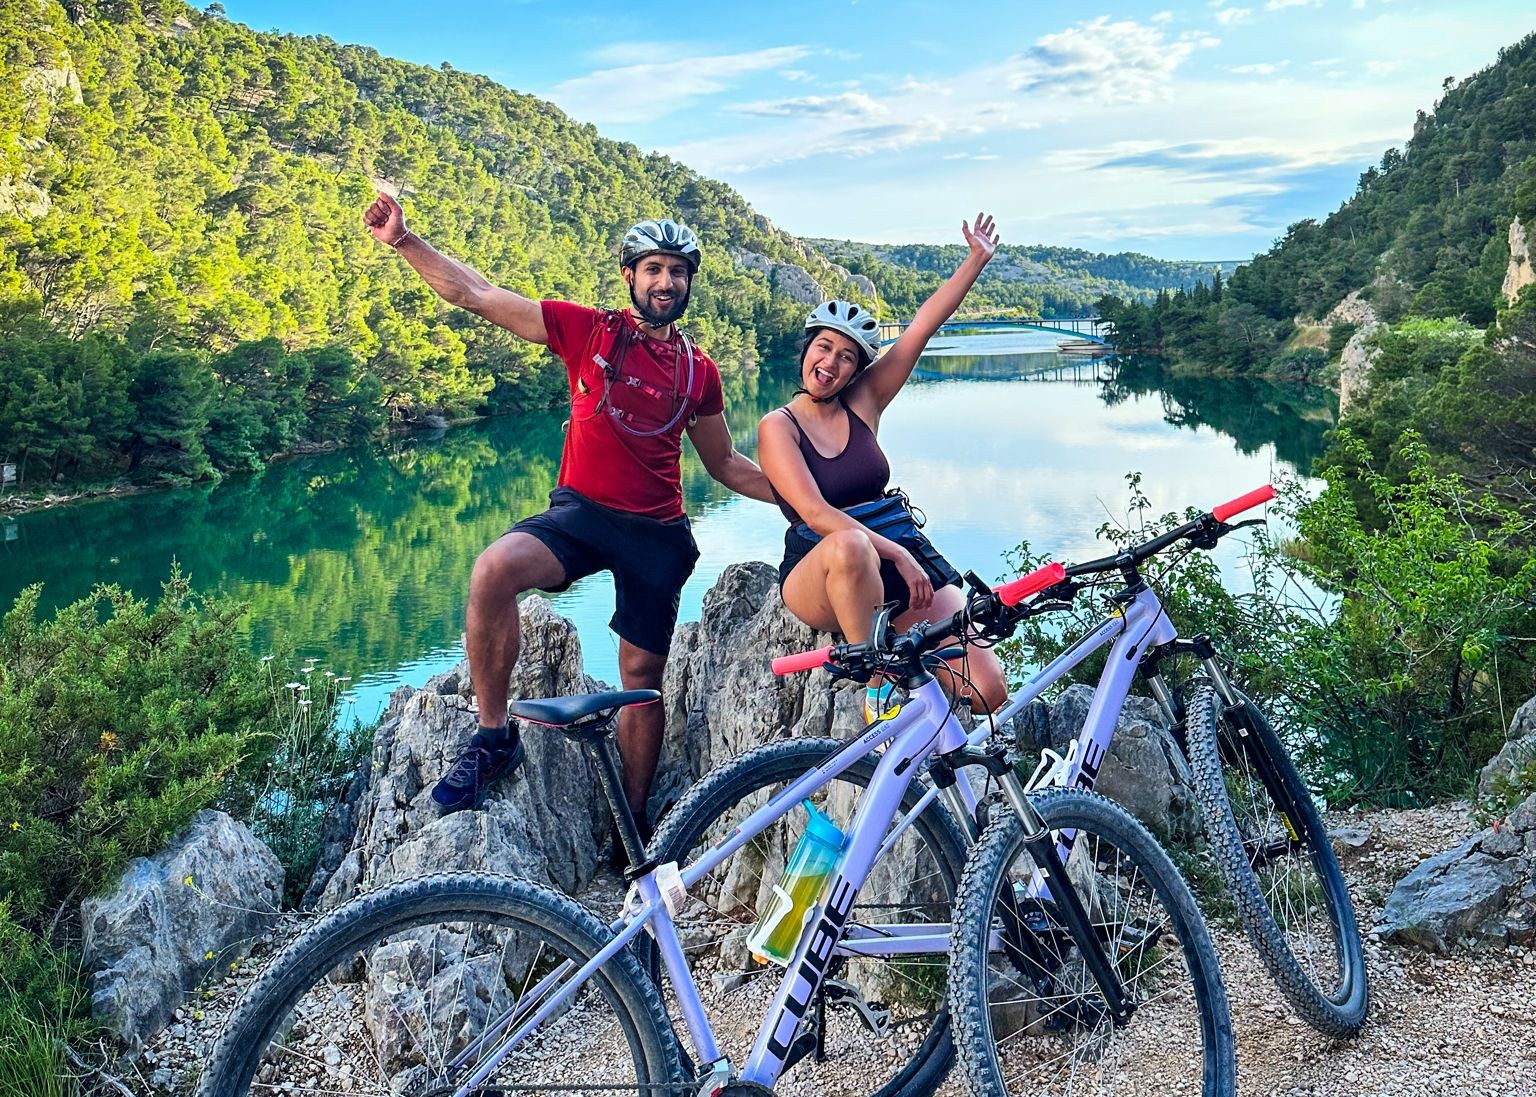 Two happy mountain bikers posing triumphantly atop a rocky outcrop with their bicycles, overlooking a serene lake surrounded by lush greenery in the Krka National park